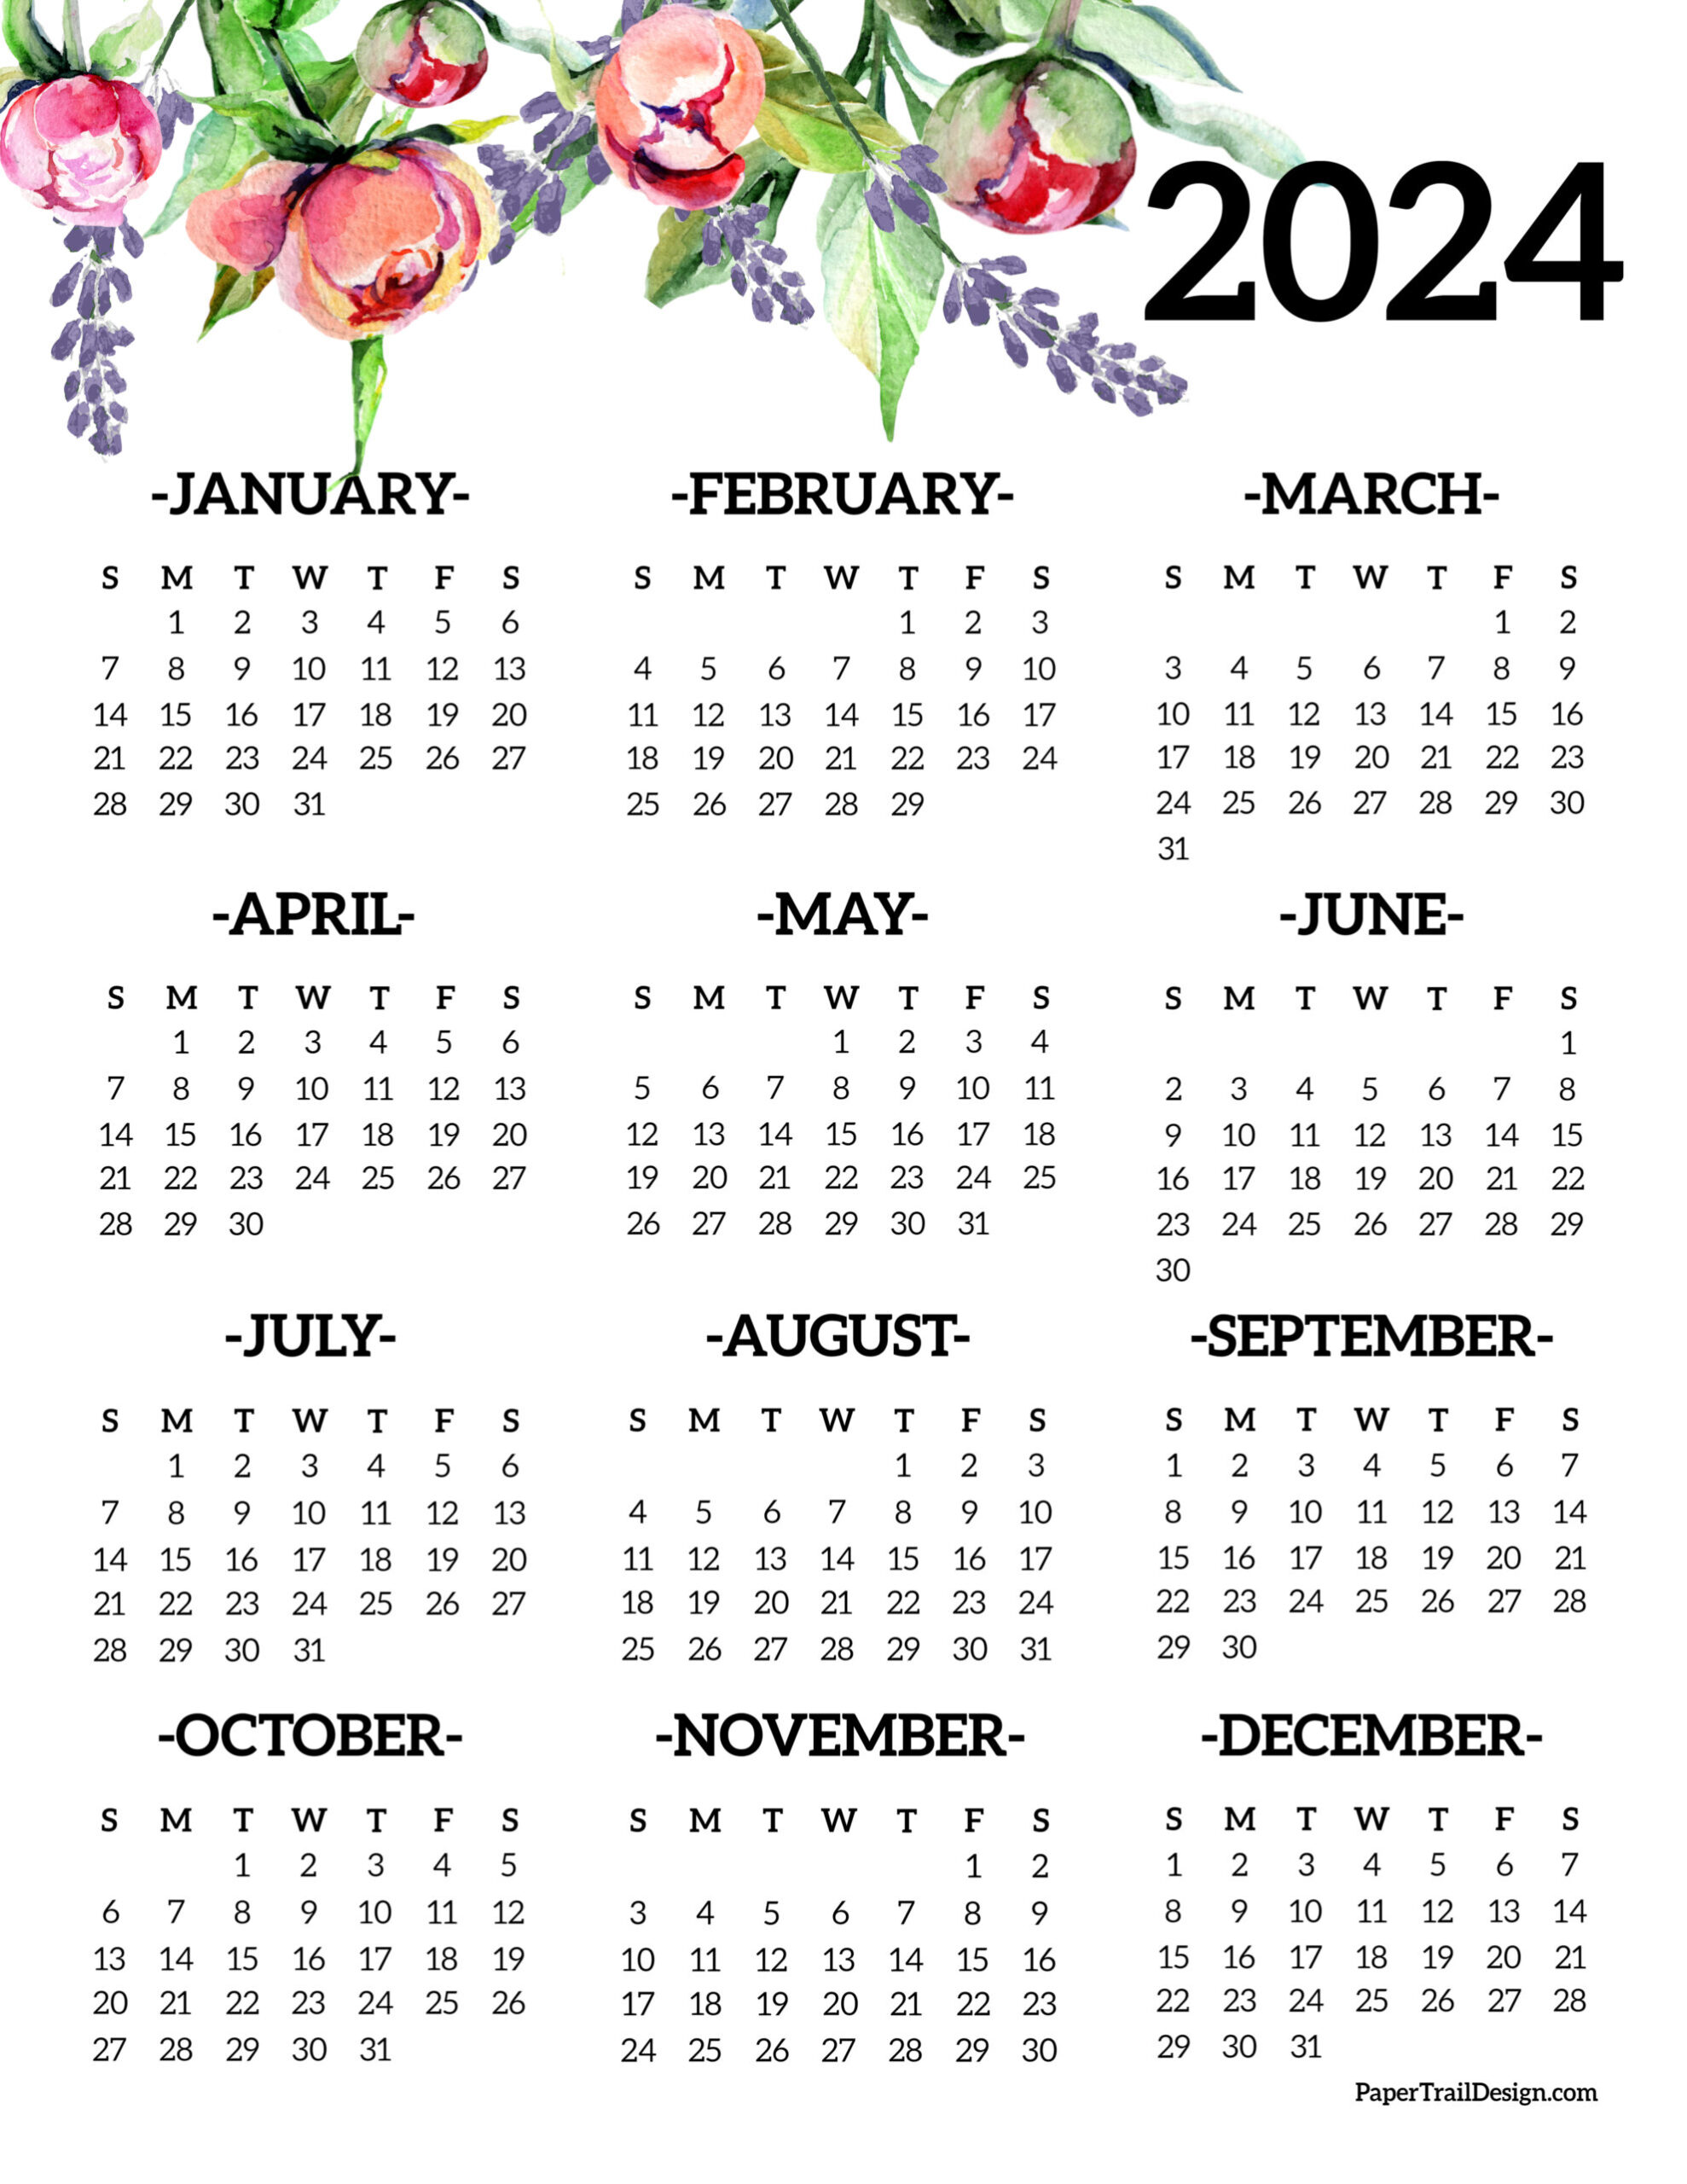 Calendar 2024 Printable One Page - Paper Trail Design for Free 2024 Yearly Calendar Printable One Page